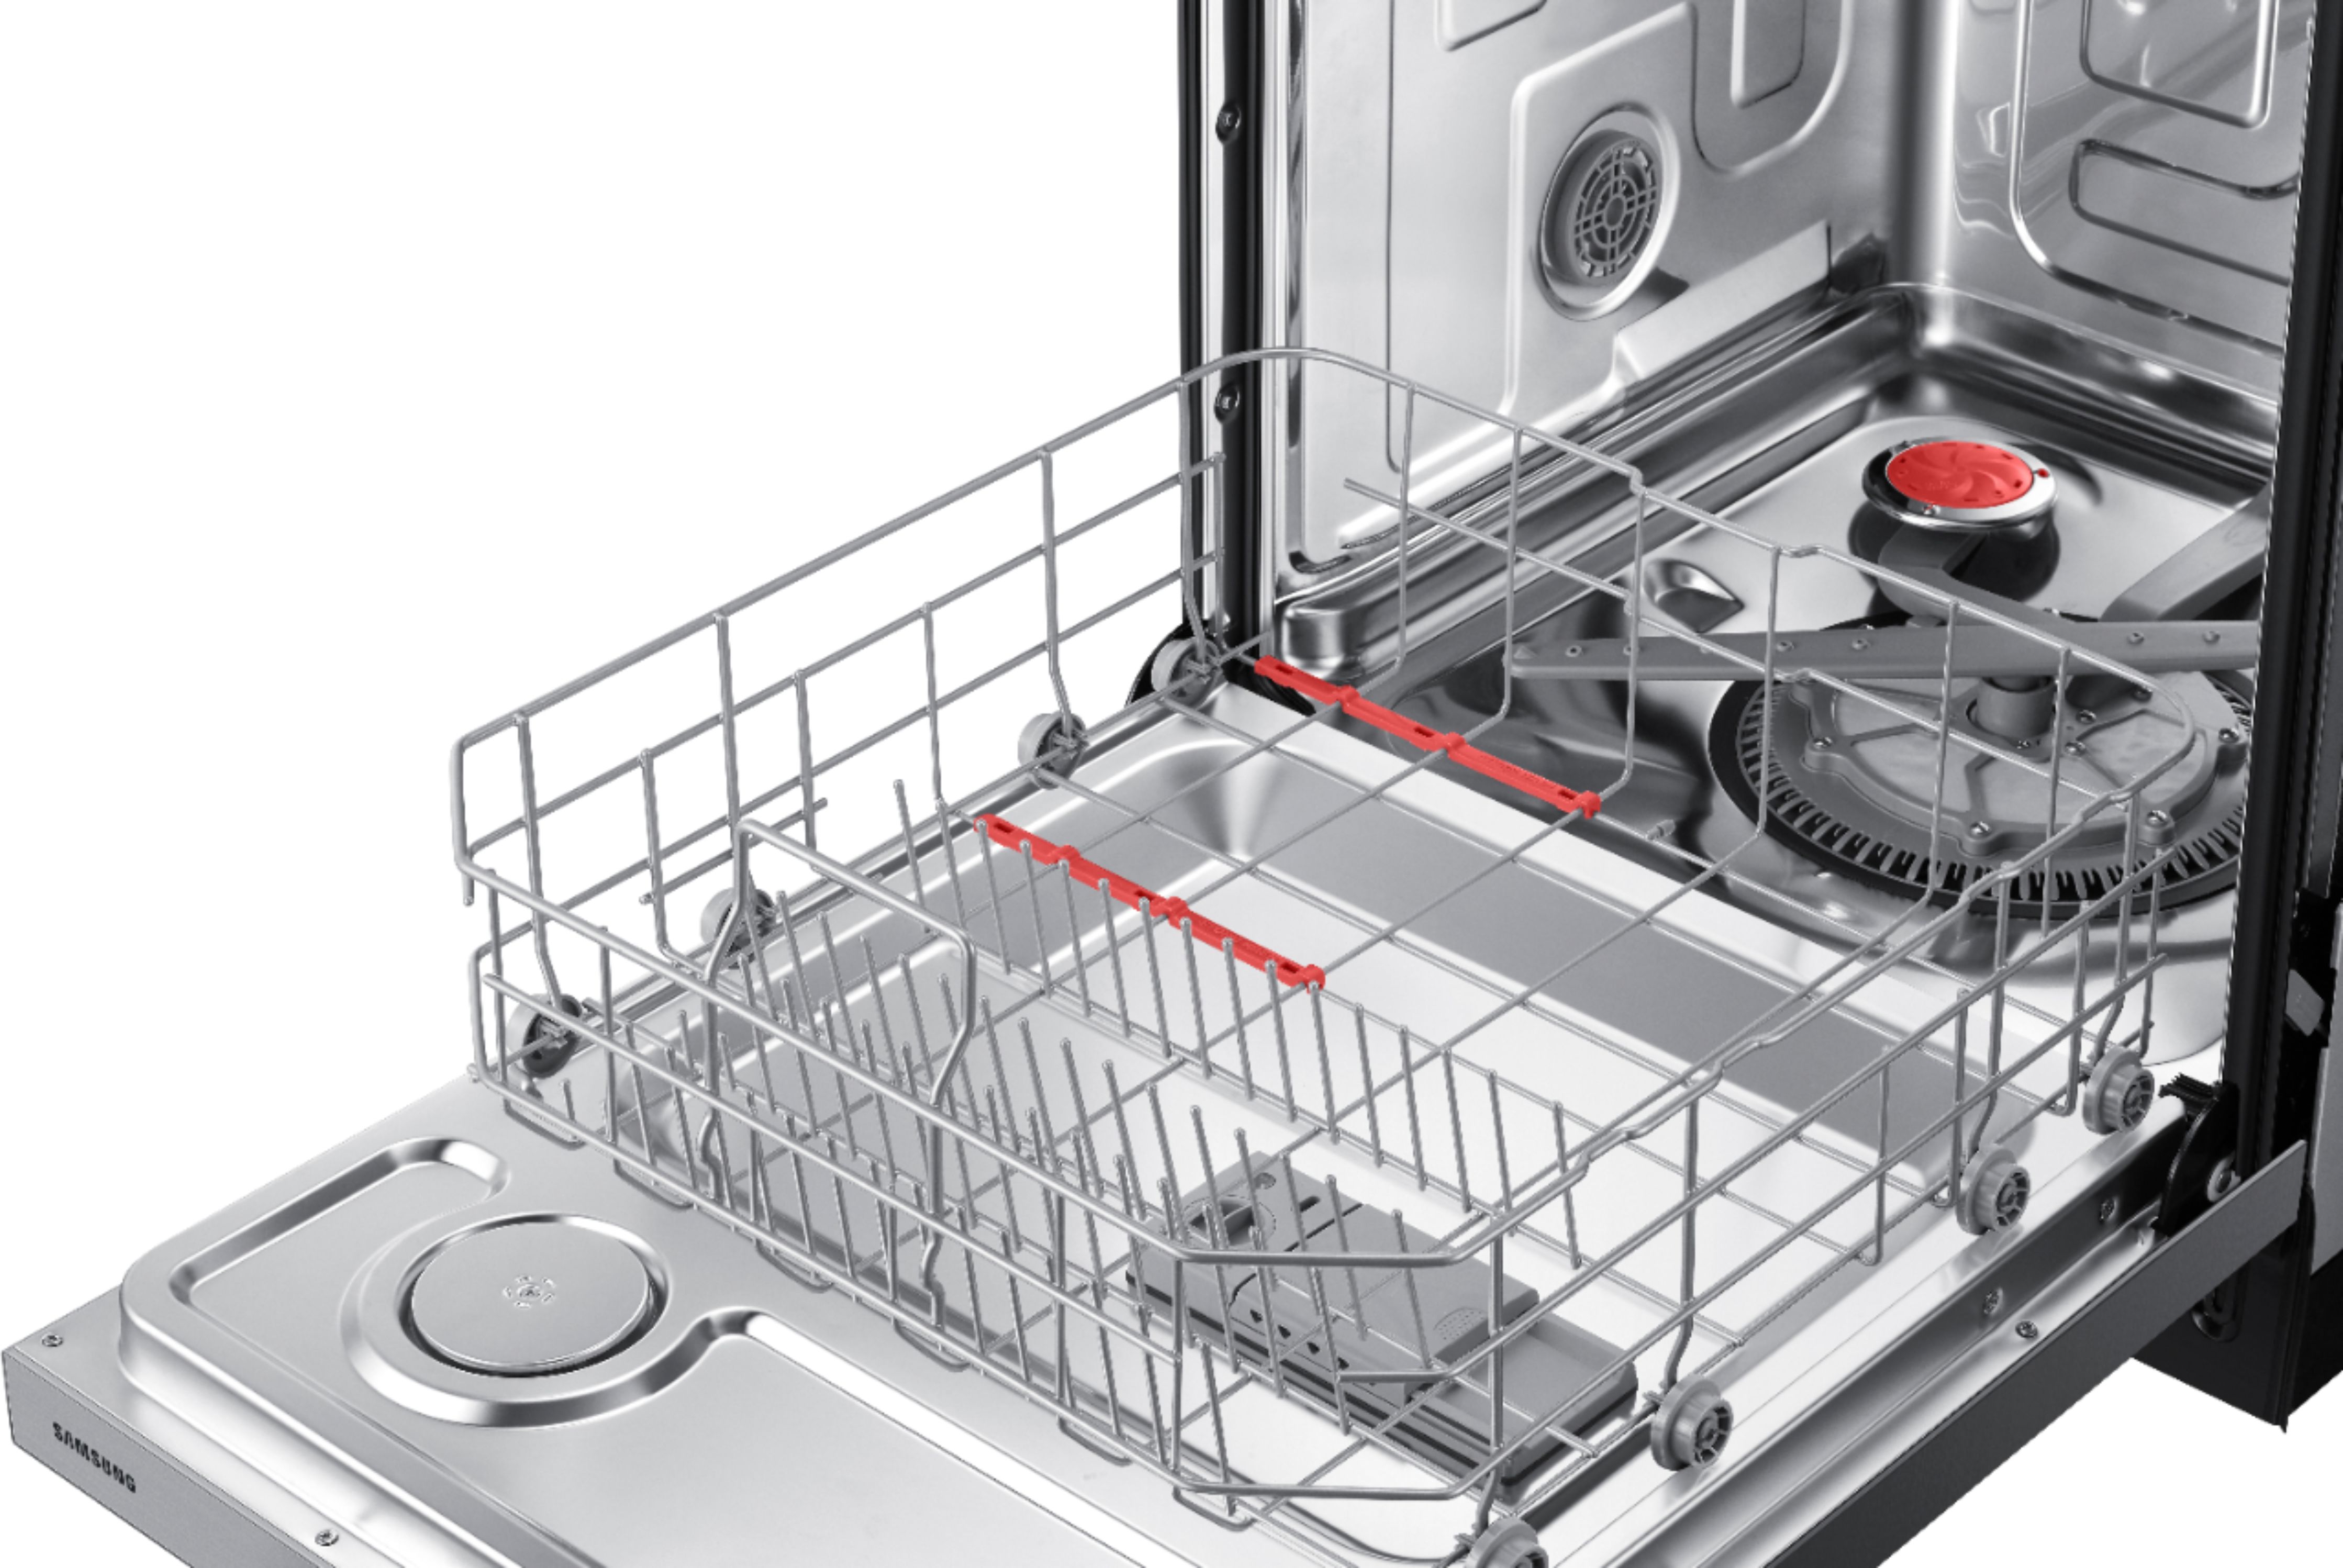 DW80R5060US Samsung 24 Built In Dishwasher with StormWash - Recessed  Handle - Fingerprint Resistant Stainless Steel